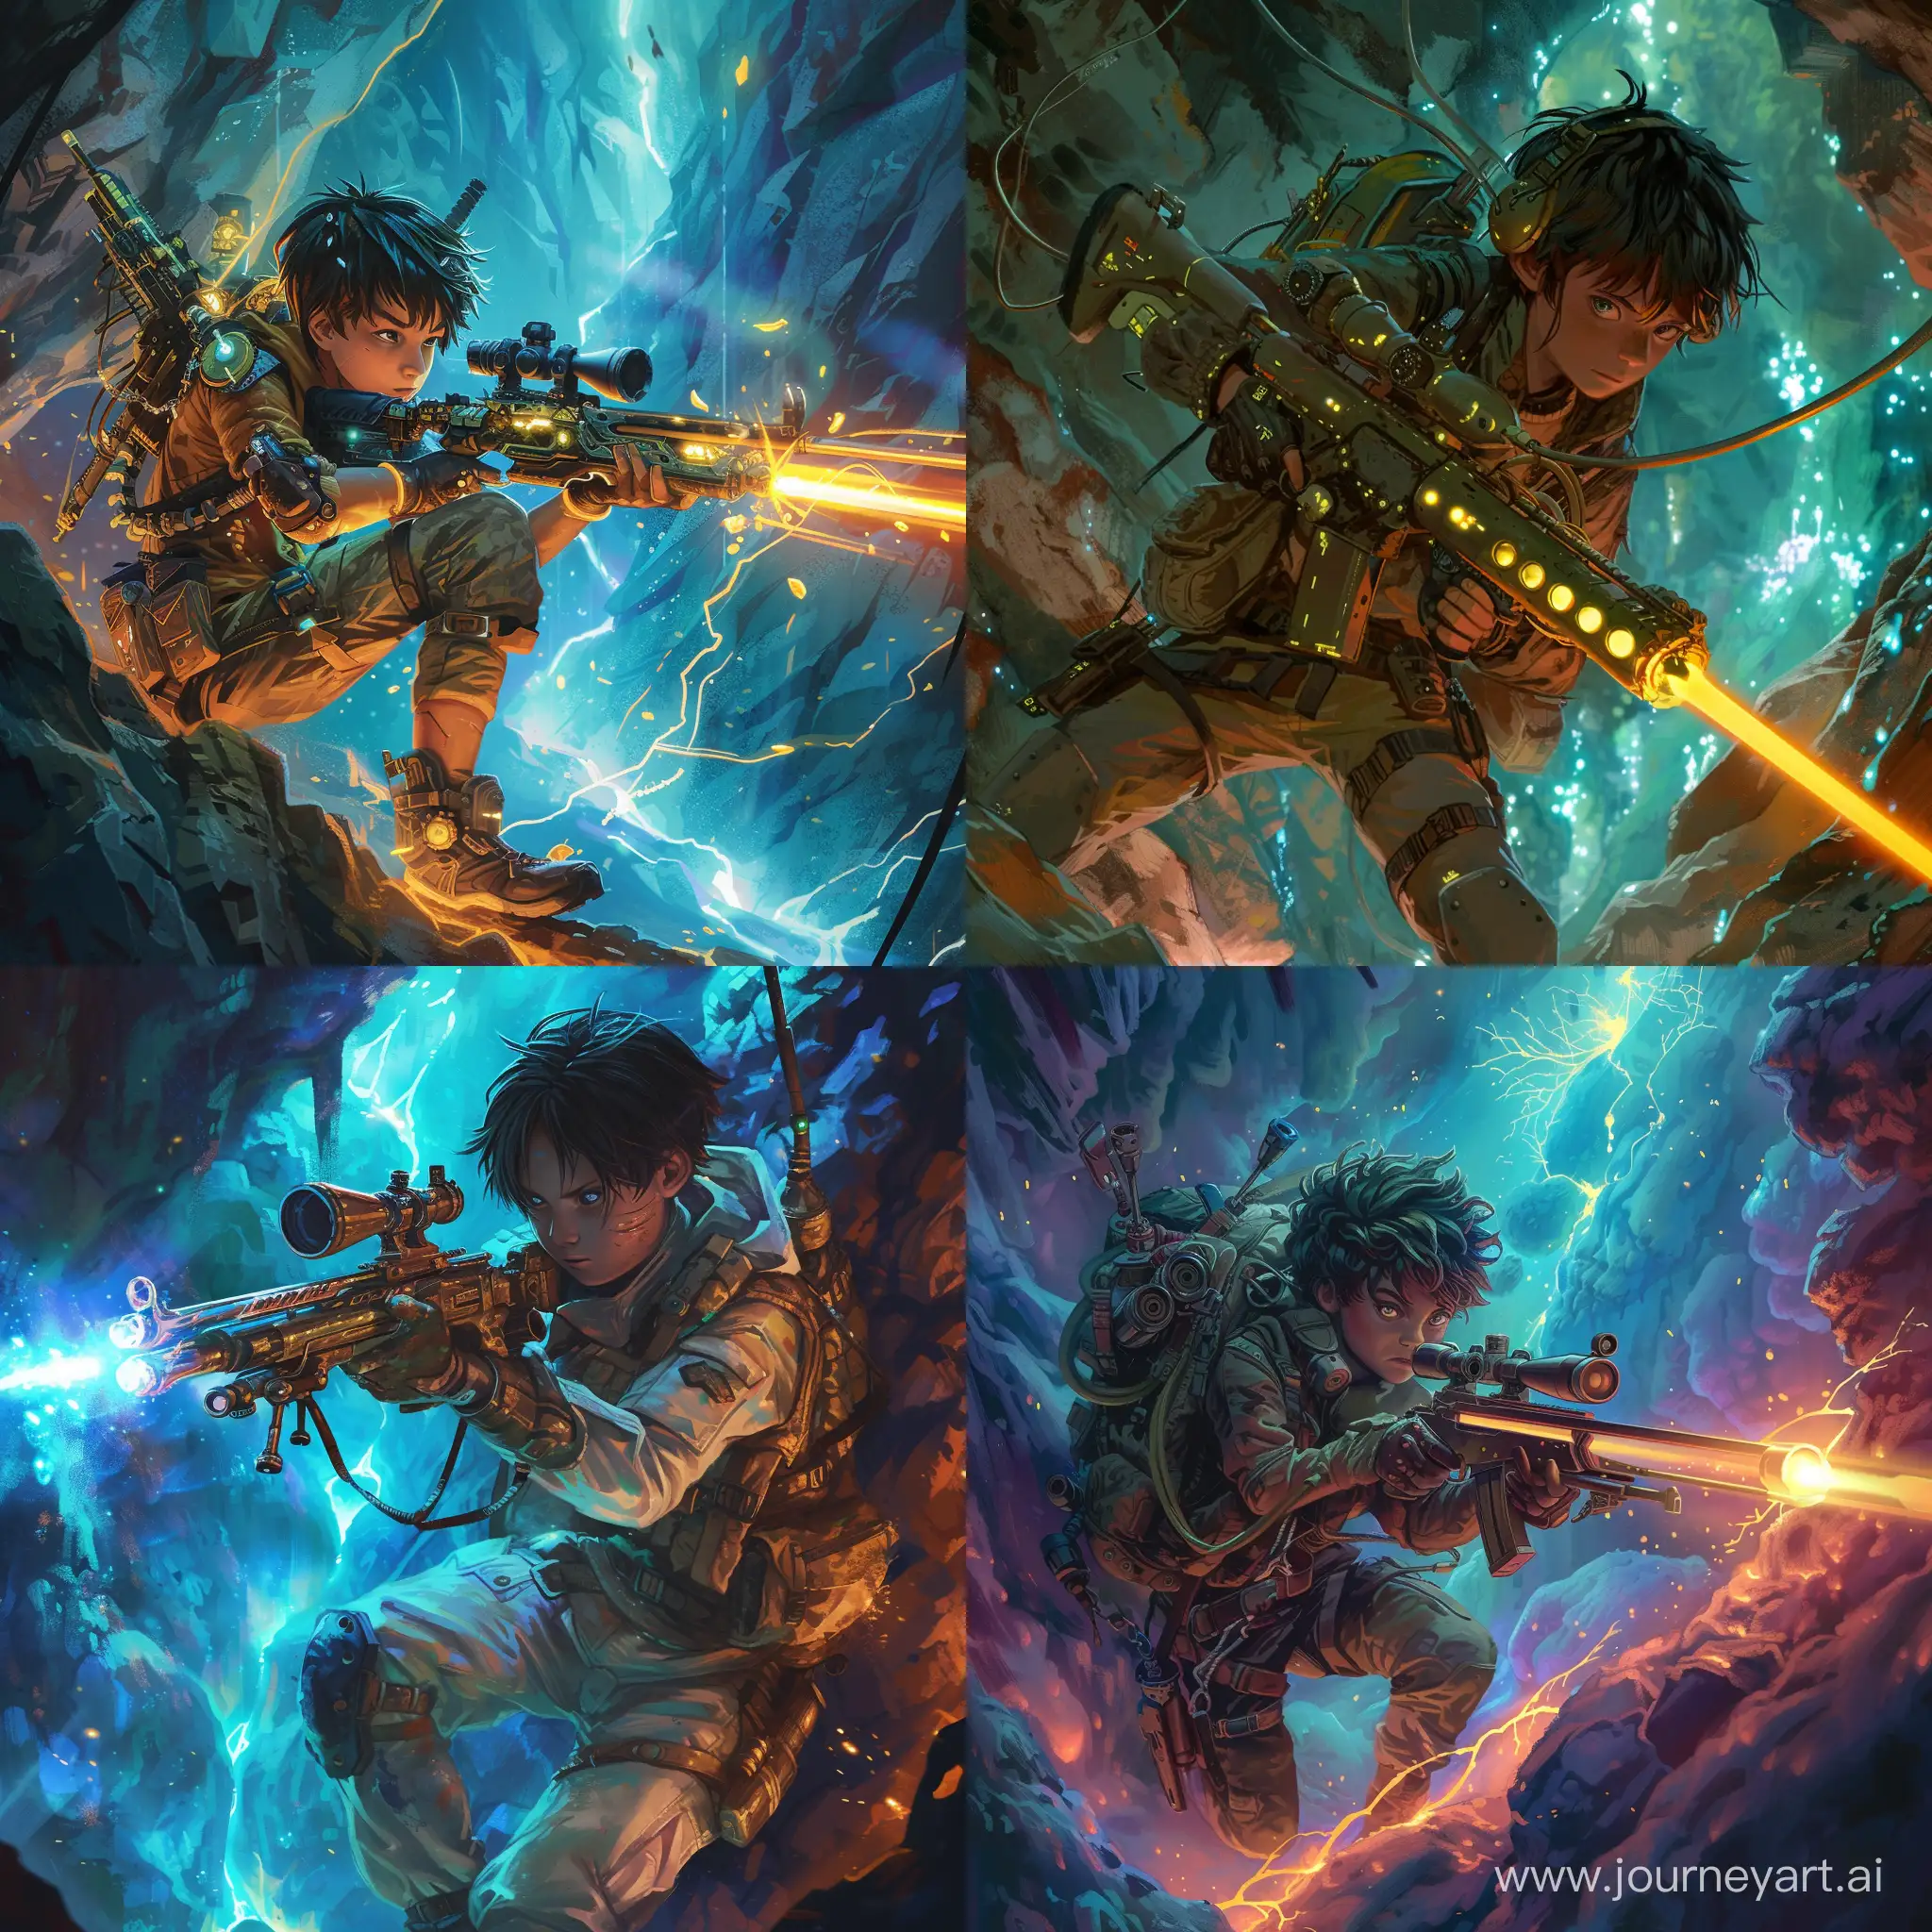 A 13-year-old cave raider with a stylistic rifle, exploring a luminous abyss. Capture his youthful determination and the mystical allure of the abyss in a detailed, anime-inspired style. Focus on his adventurous spirit, the intricate design of his gear and rifle, and the glowing, mysterious environment around him. Aim for a dynamic, high-resolution image that blends realism with fantasy, showcasing the boy ready for the depths below.